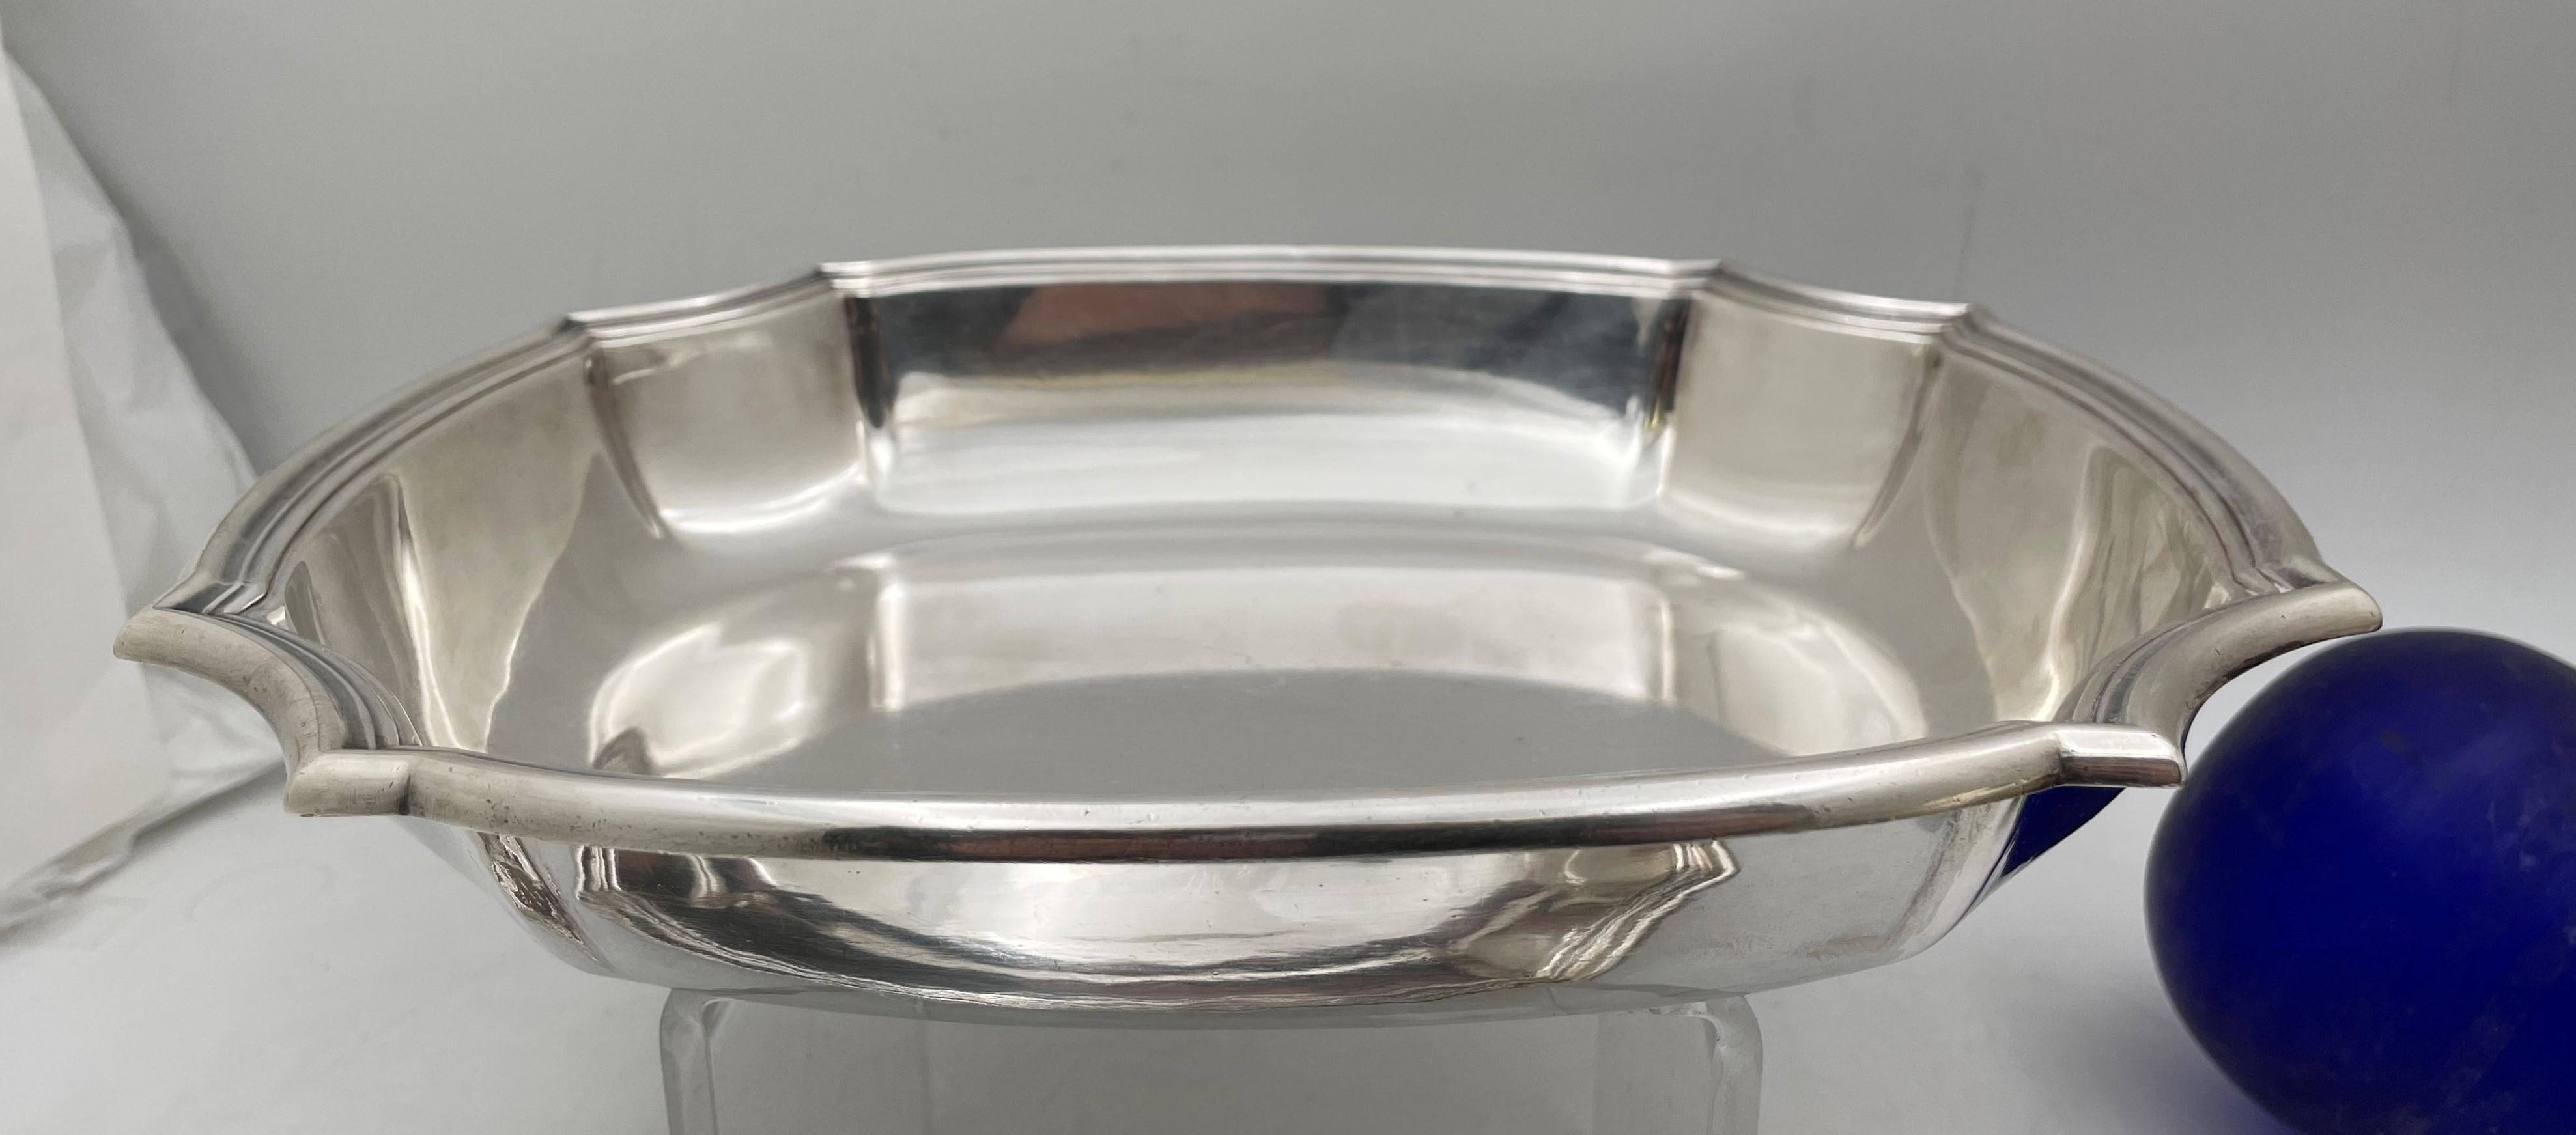 Emile Puiforcat, French 0.950 (higher purity than sterling) silver pair of vegetable bowls and dish in Art Deco style, from the early 20th century, in beautiful, geometrically-inspired design. The bowls measure 10 1/2'' in length by 8 7/8'' in width